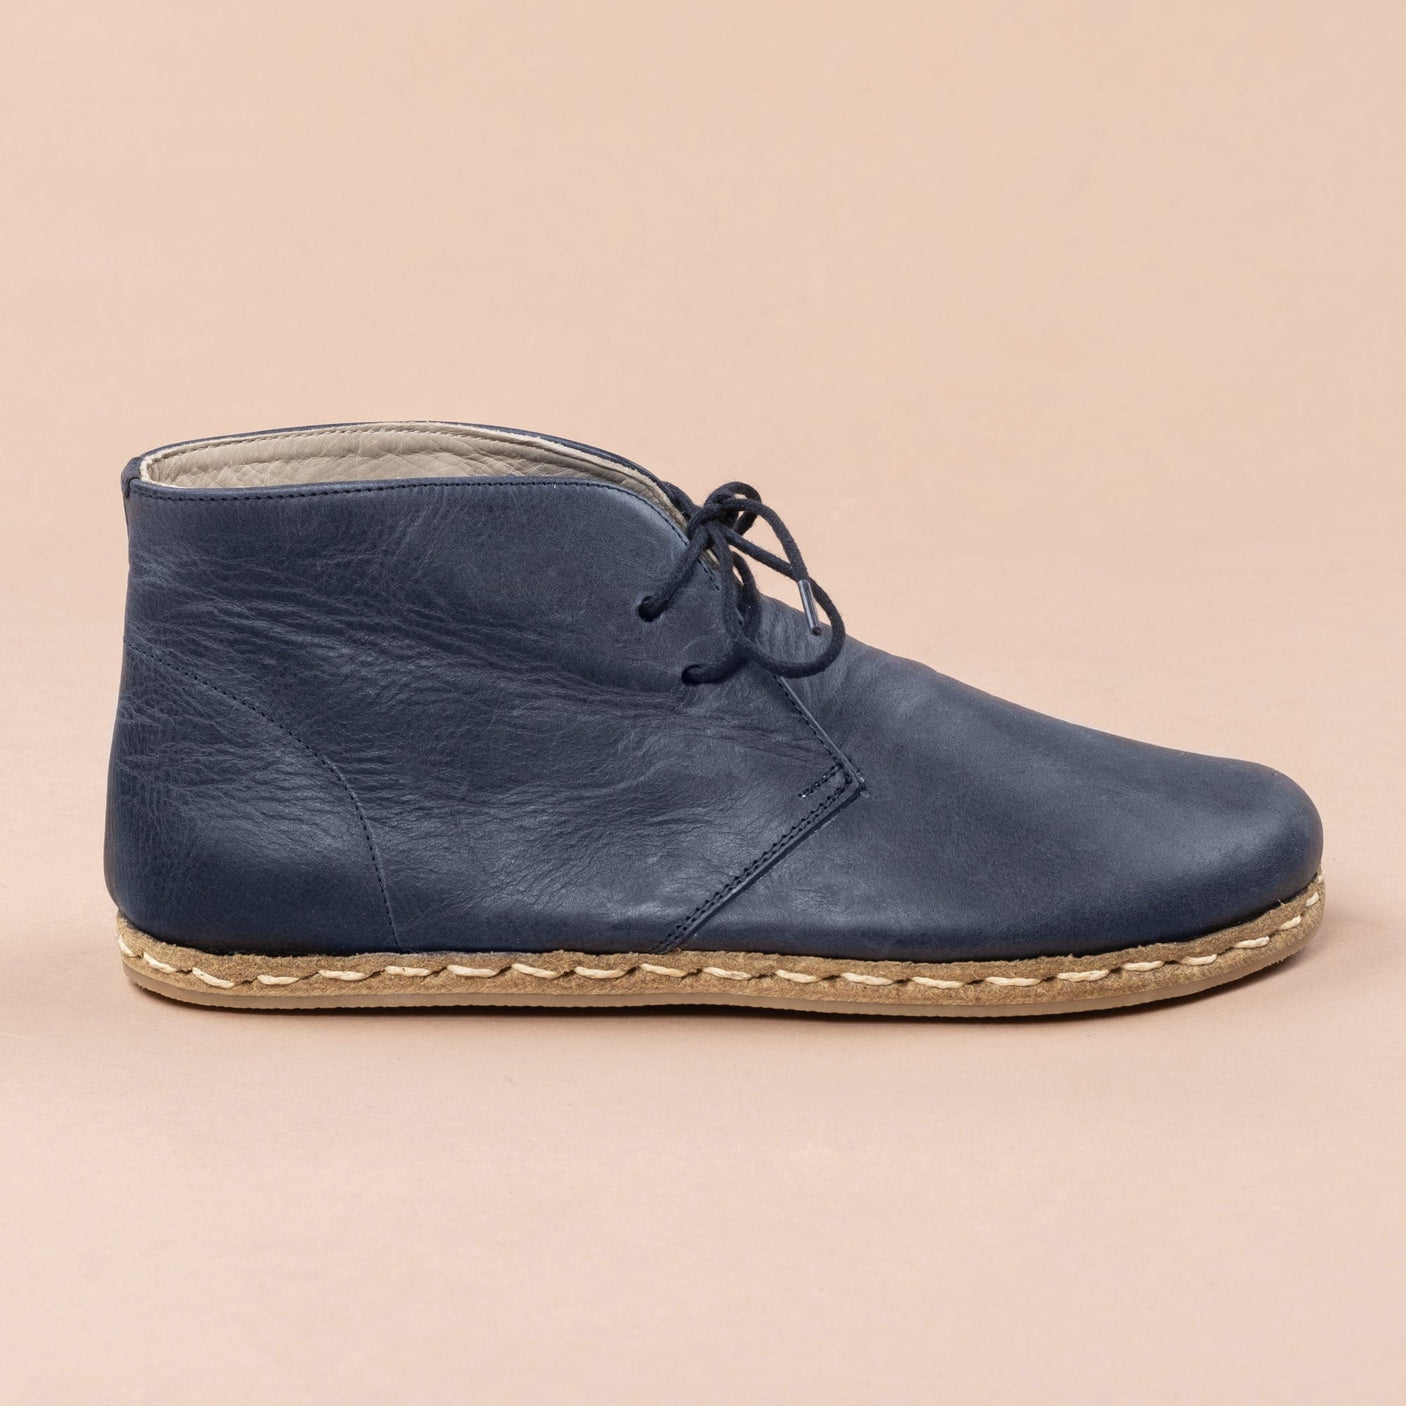 Women's Blue Barefoot Boots with Laces